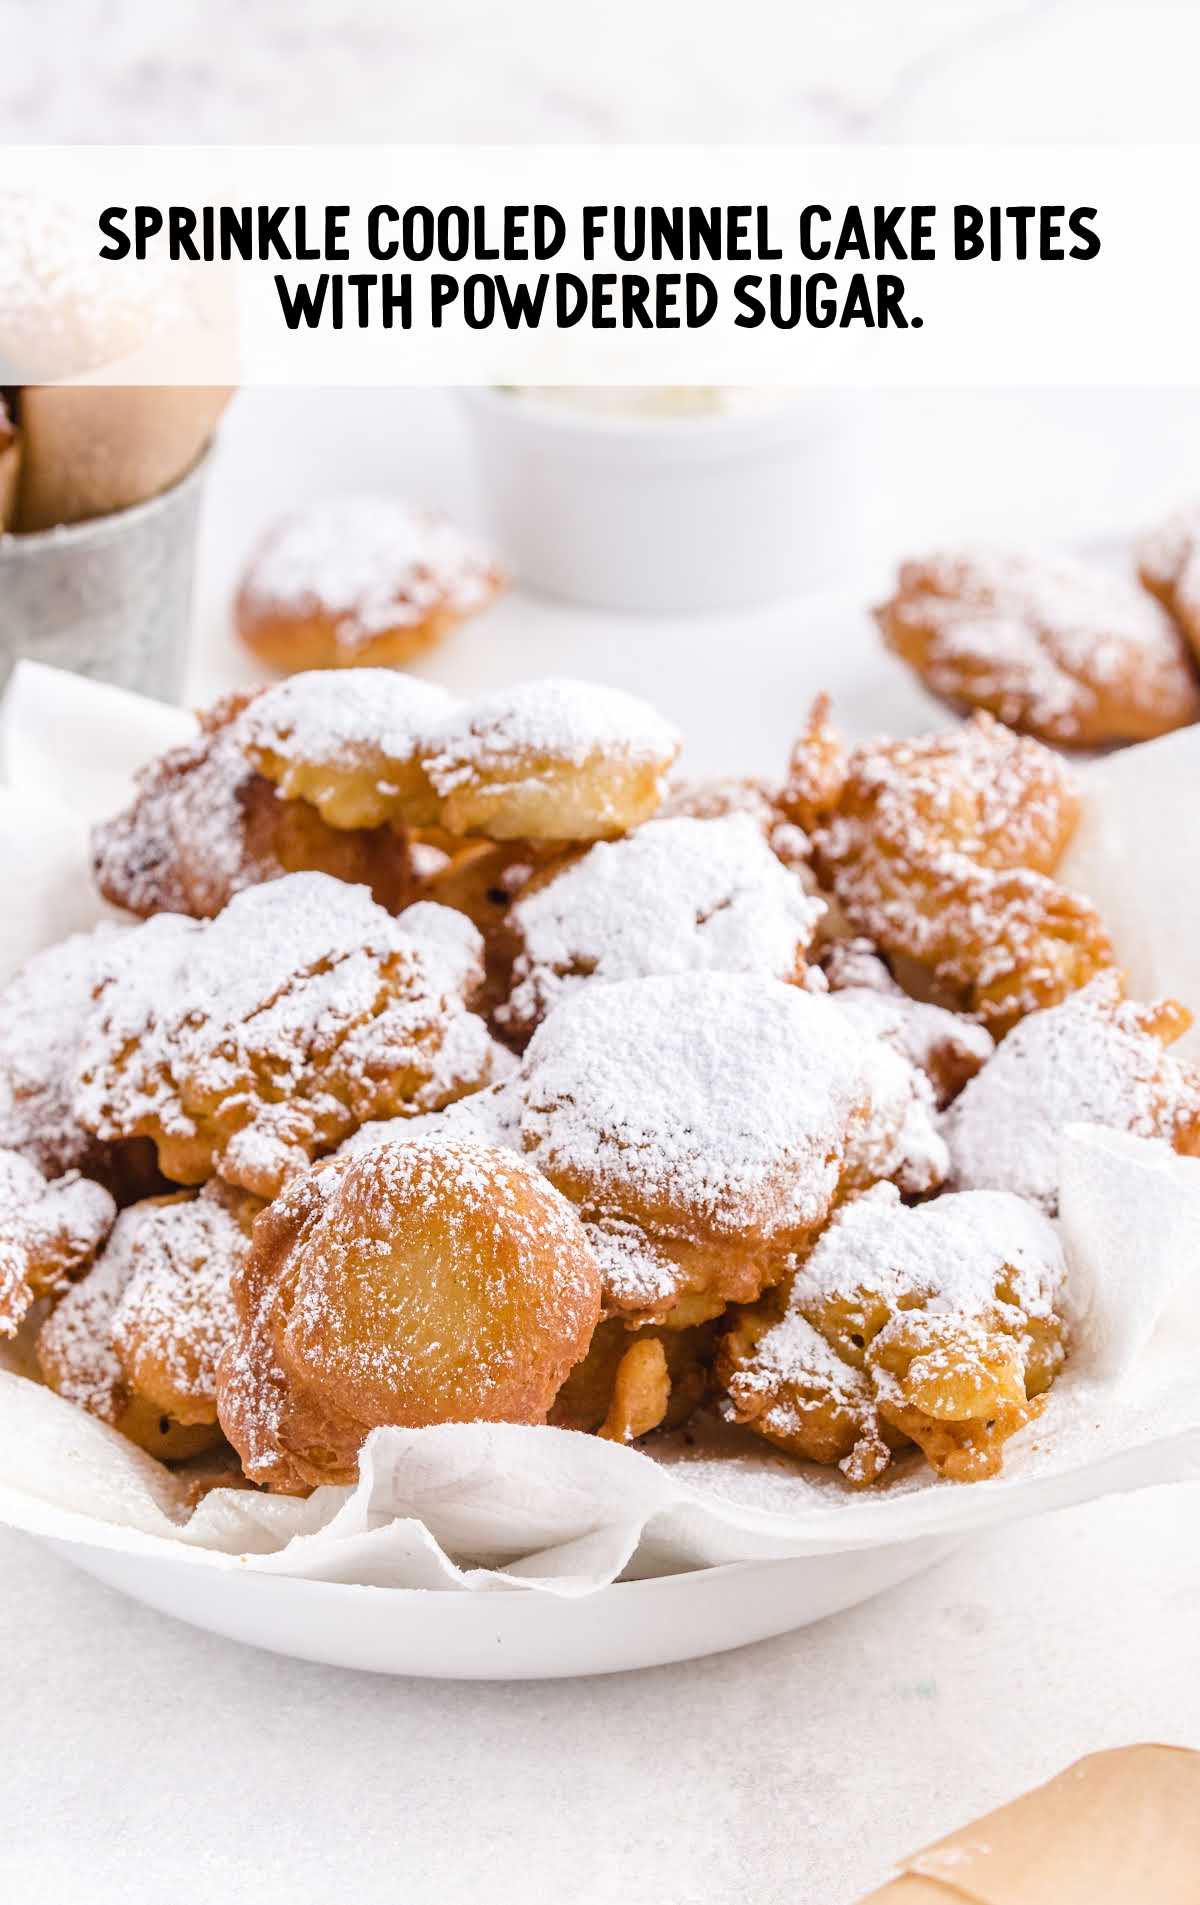 Funnel Cake Bites topped with powdered sugar